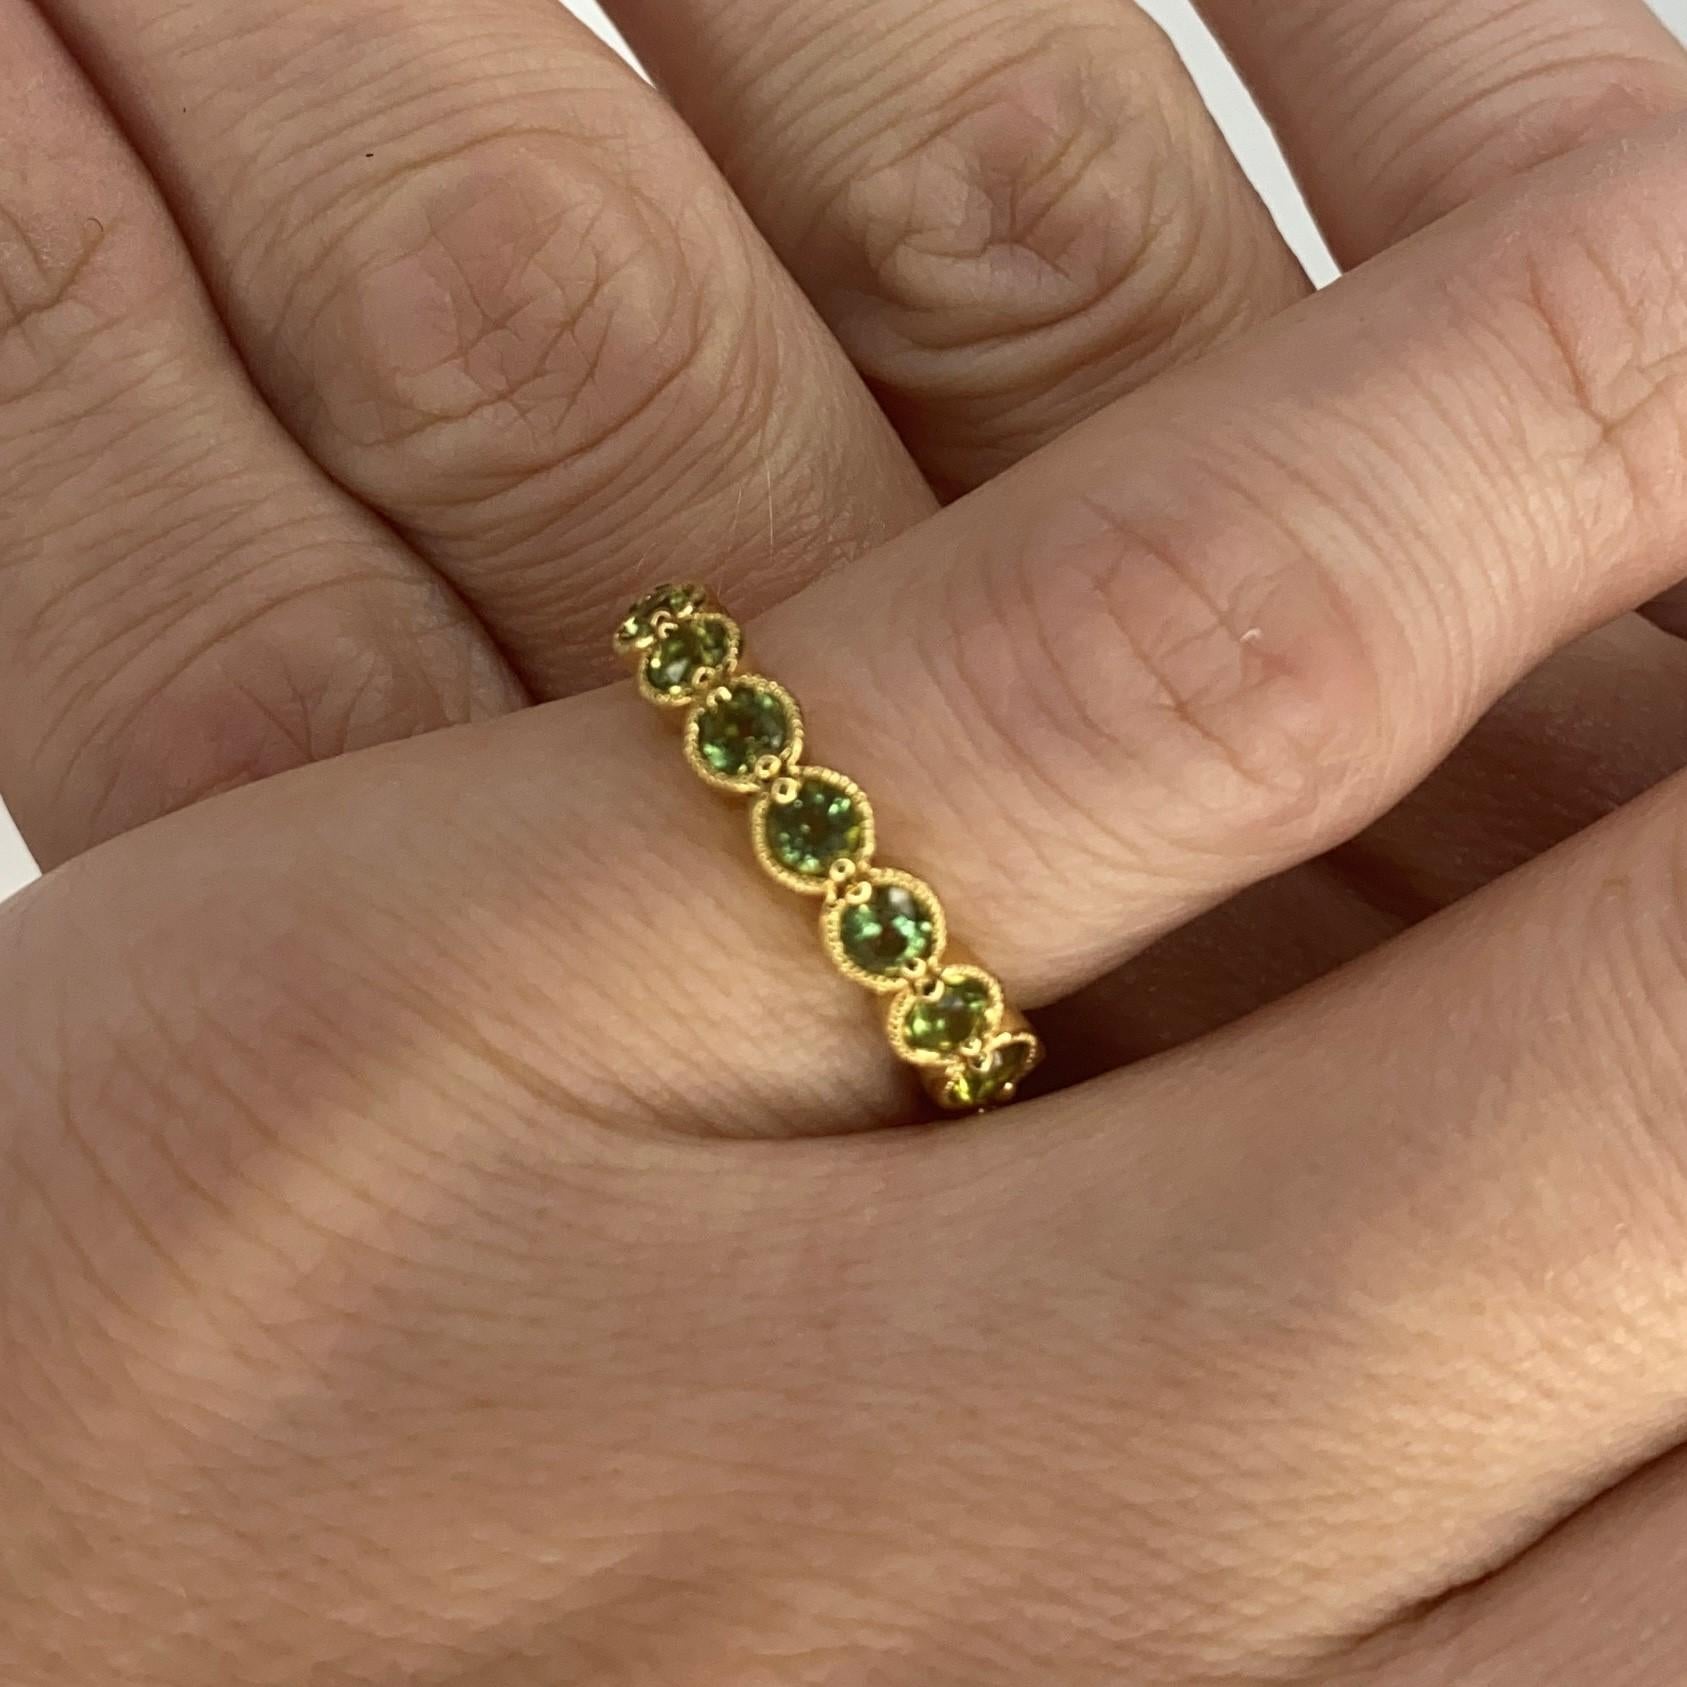 Brilliant Cut Bony Levy Eternity Band Ring in 18Kt Yellow Gold with 2.42 Cts in Green Peridots For Sale